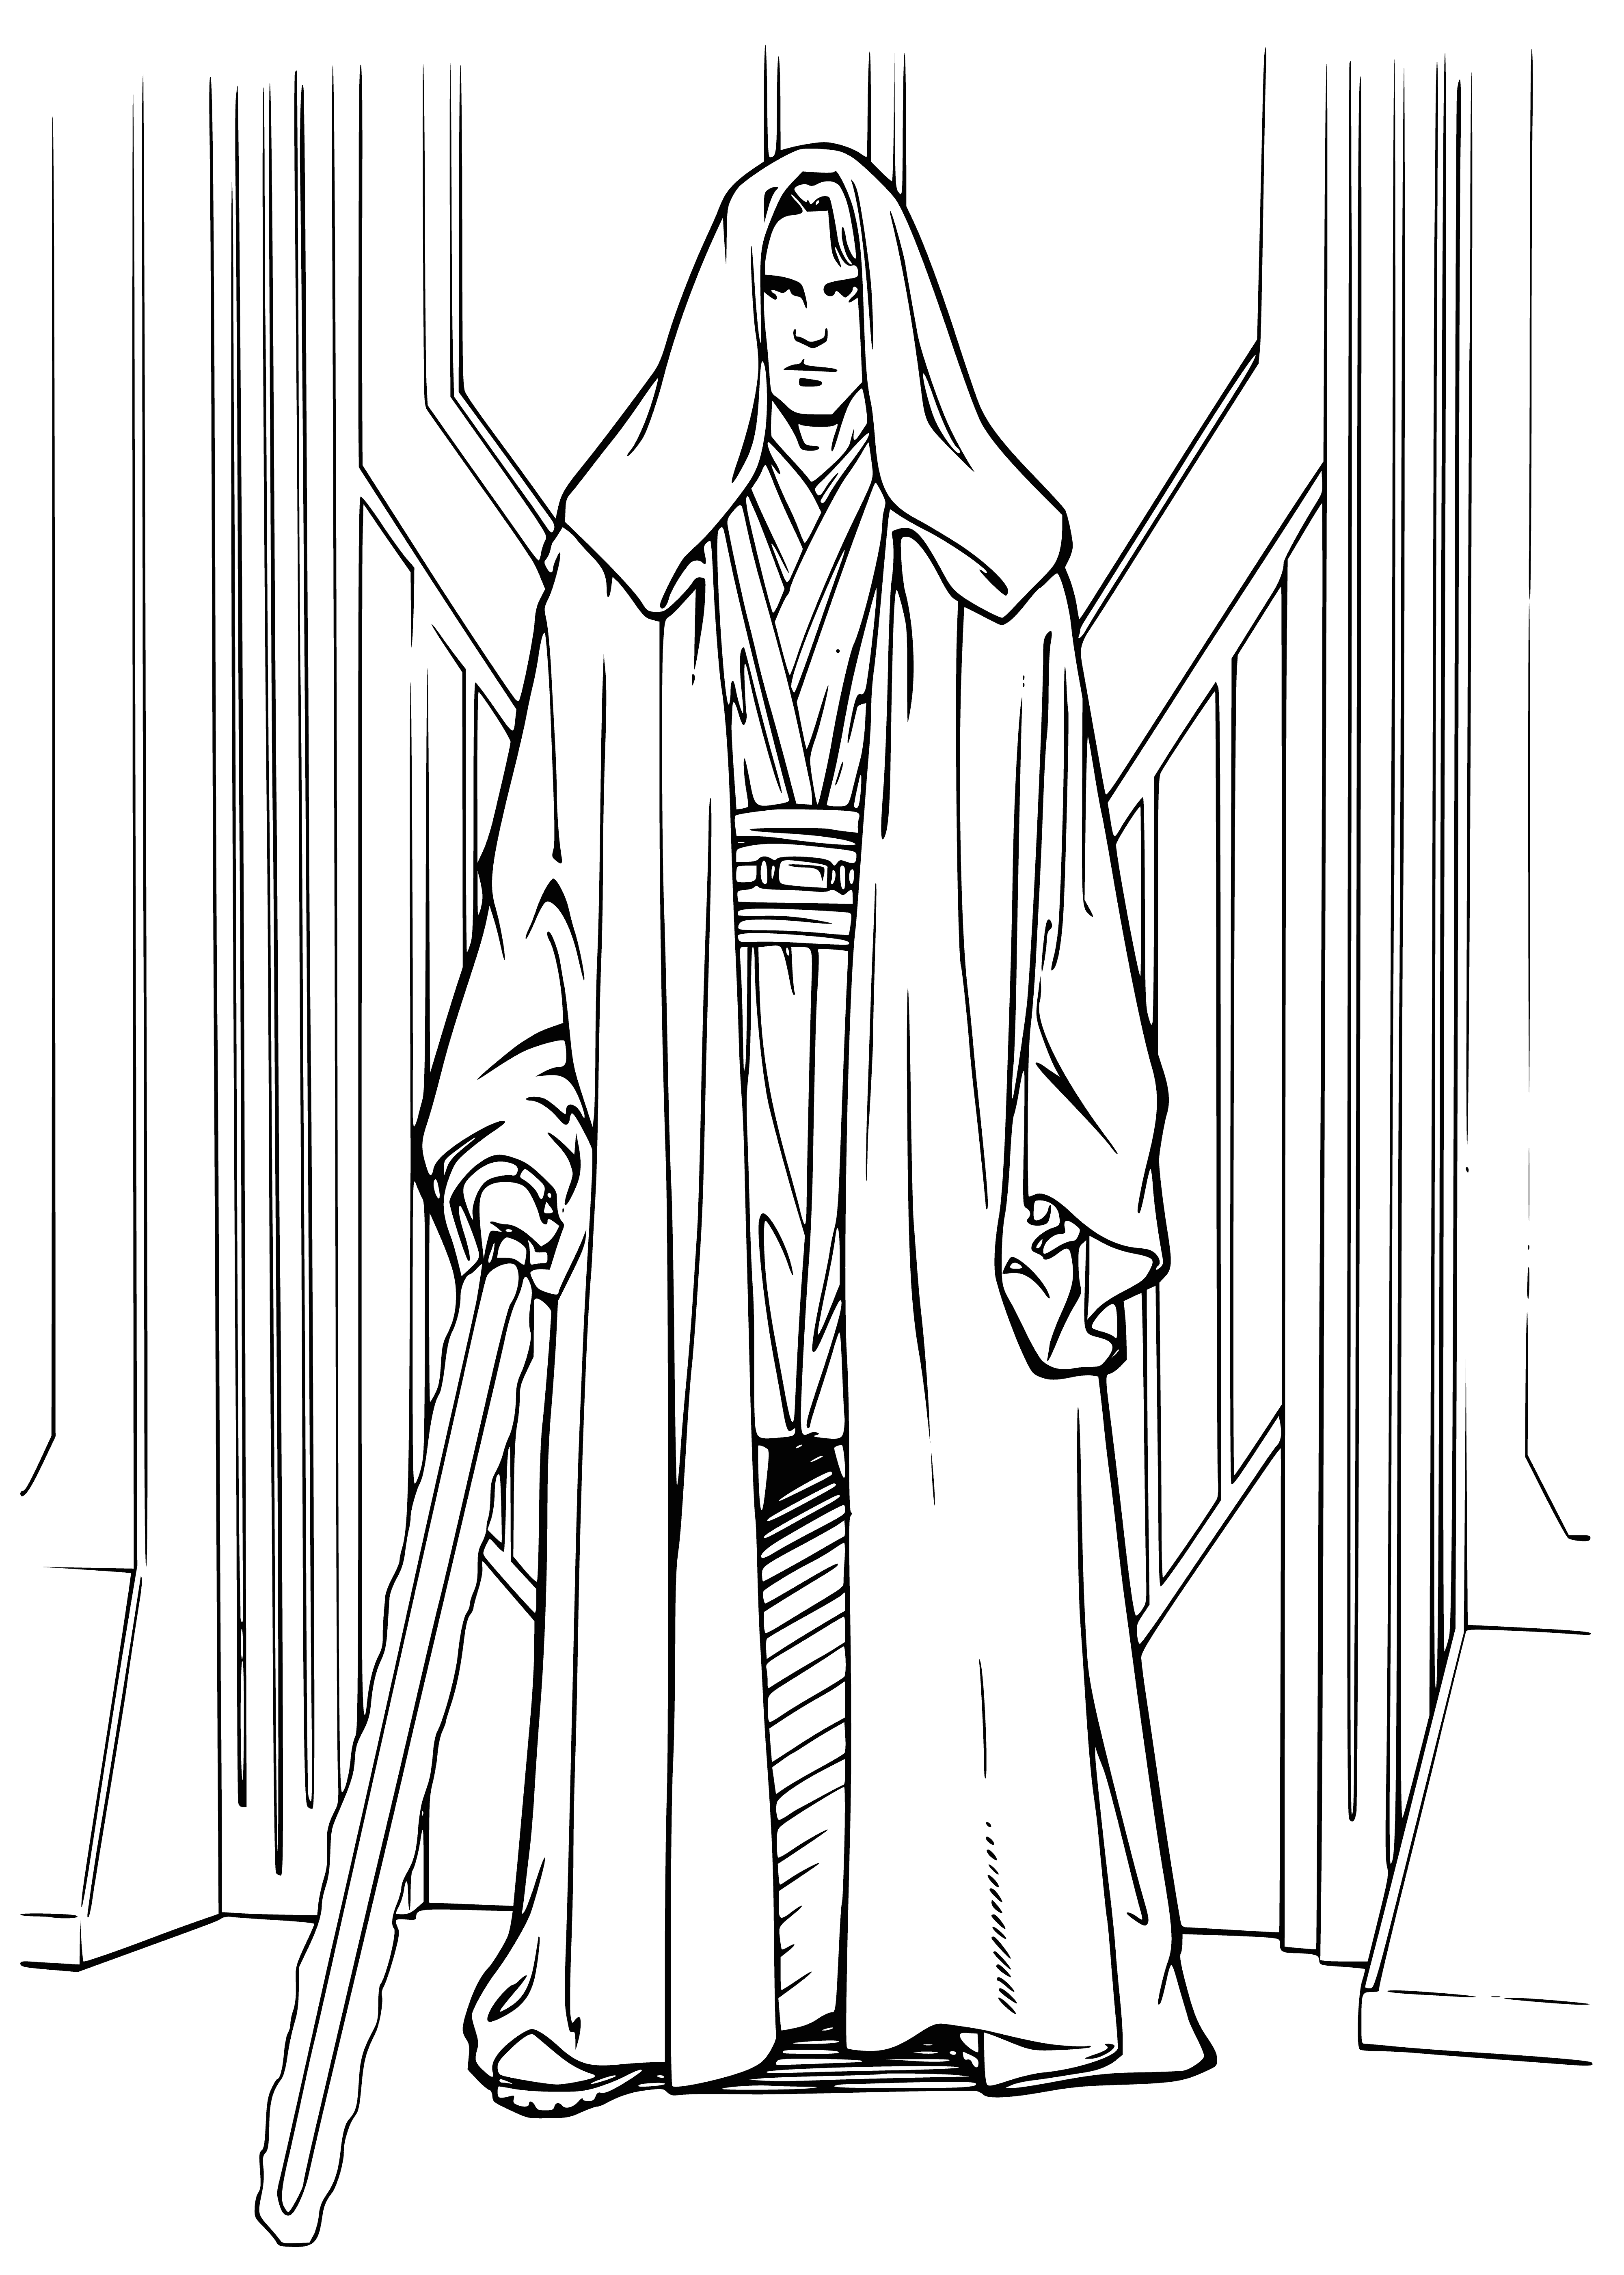 coloring page: Enakin in his cape, blue lightsaber in hand, determined look on face, ready for action. #StarWars